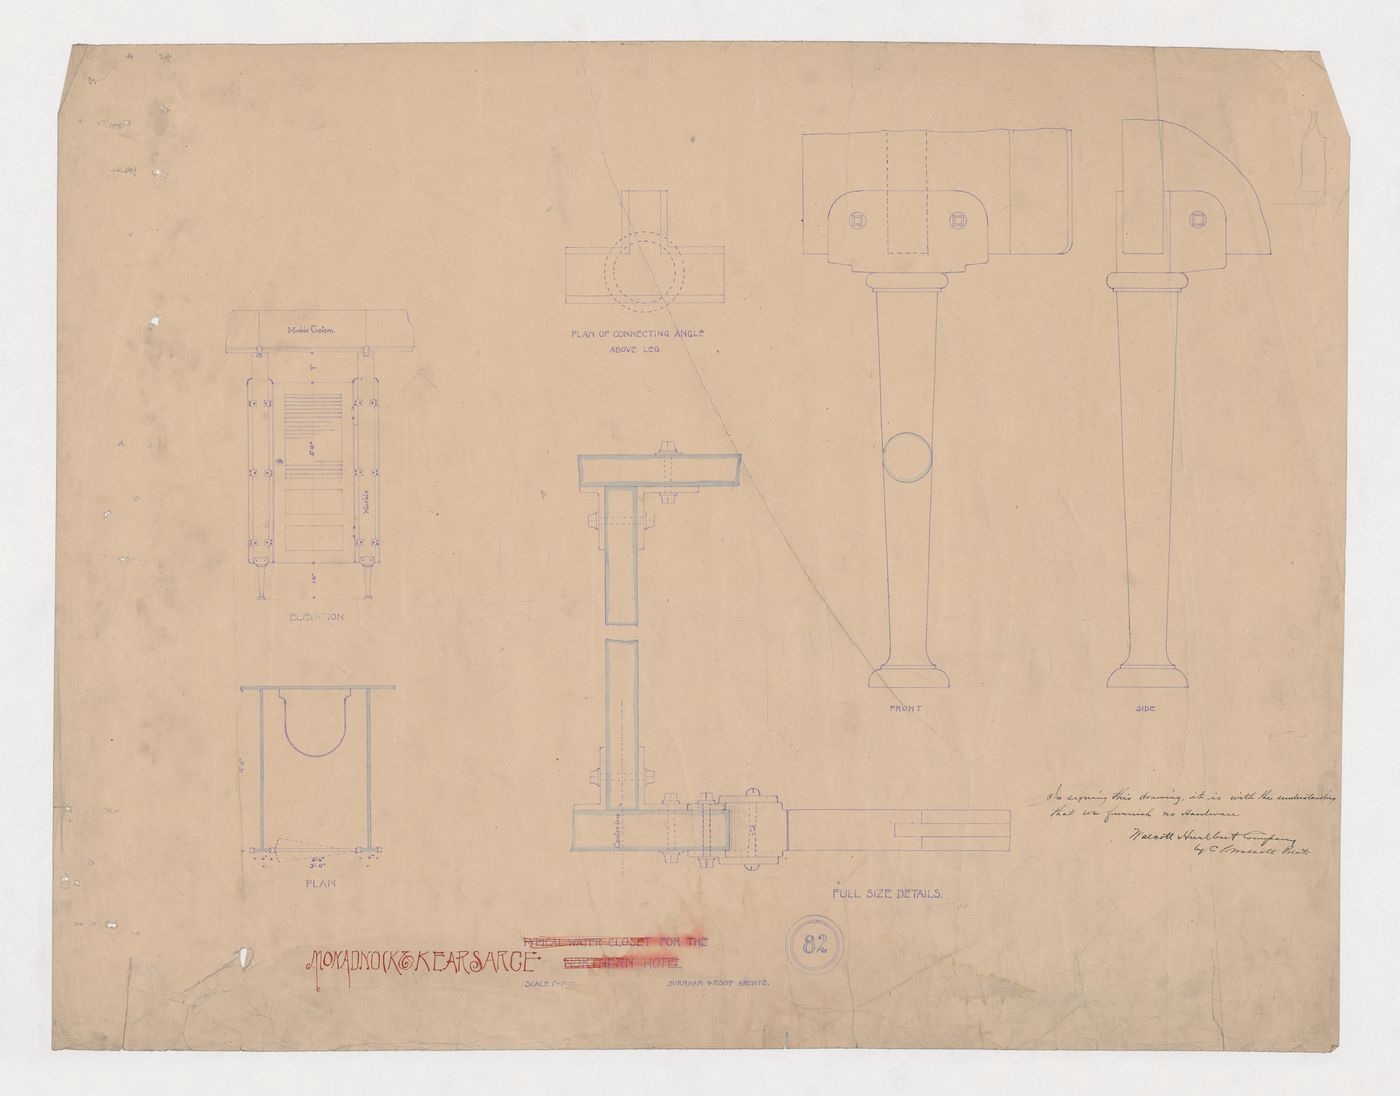 Monadnock and Kearsarge Buildings, Chicago: Plan, elevation and full-scale details for the toilet compartments